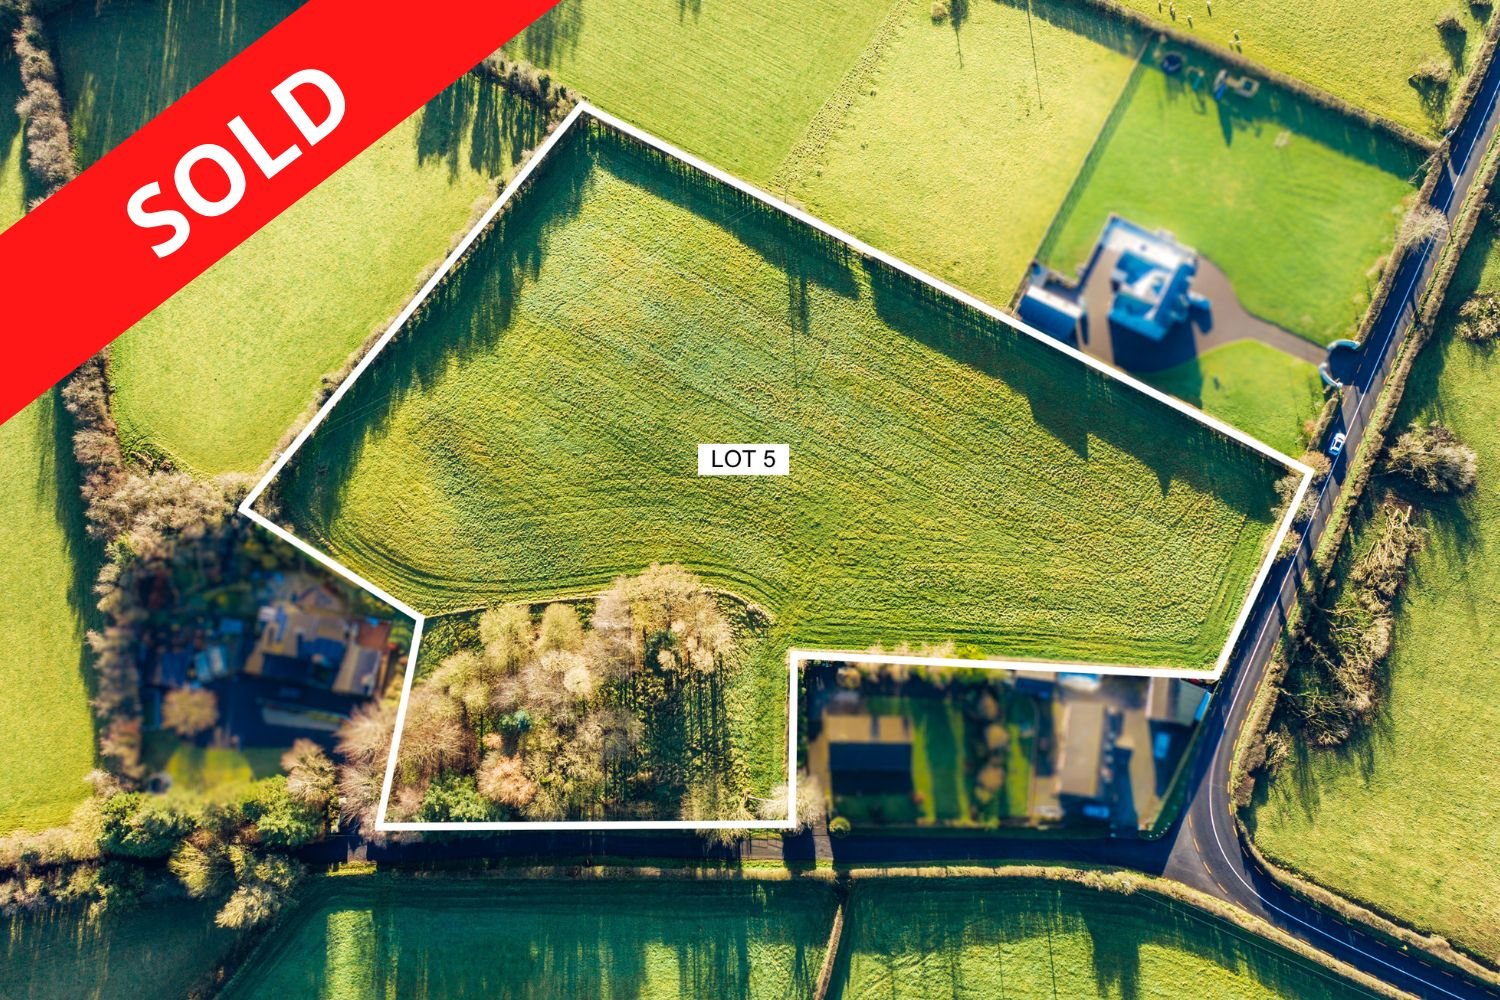 Sold - 4 Acres, Sunnyhill.jpg